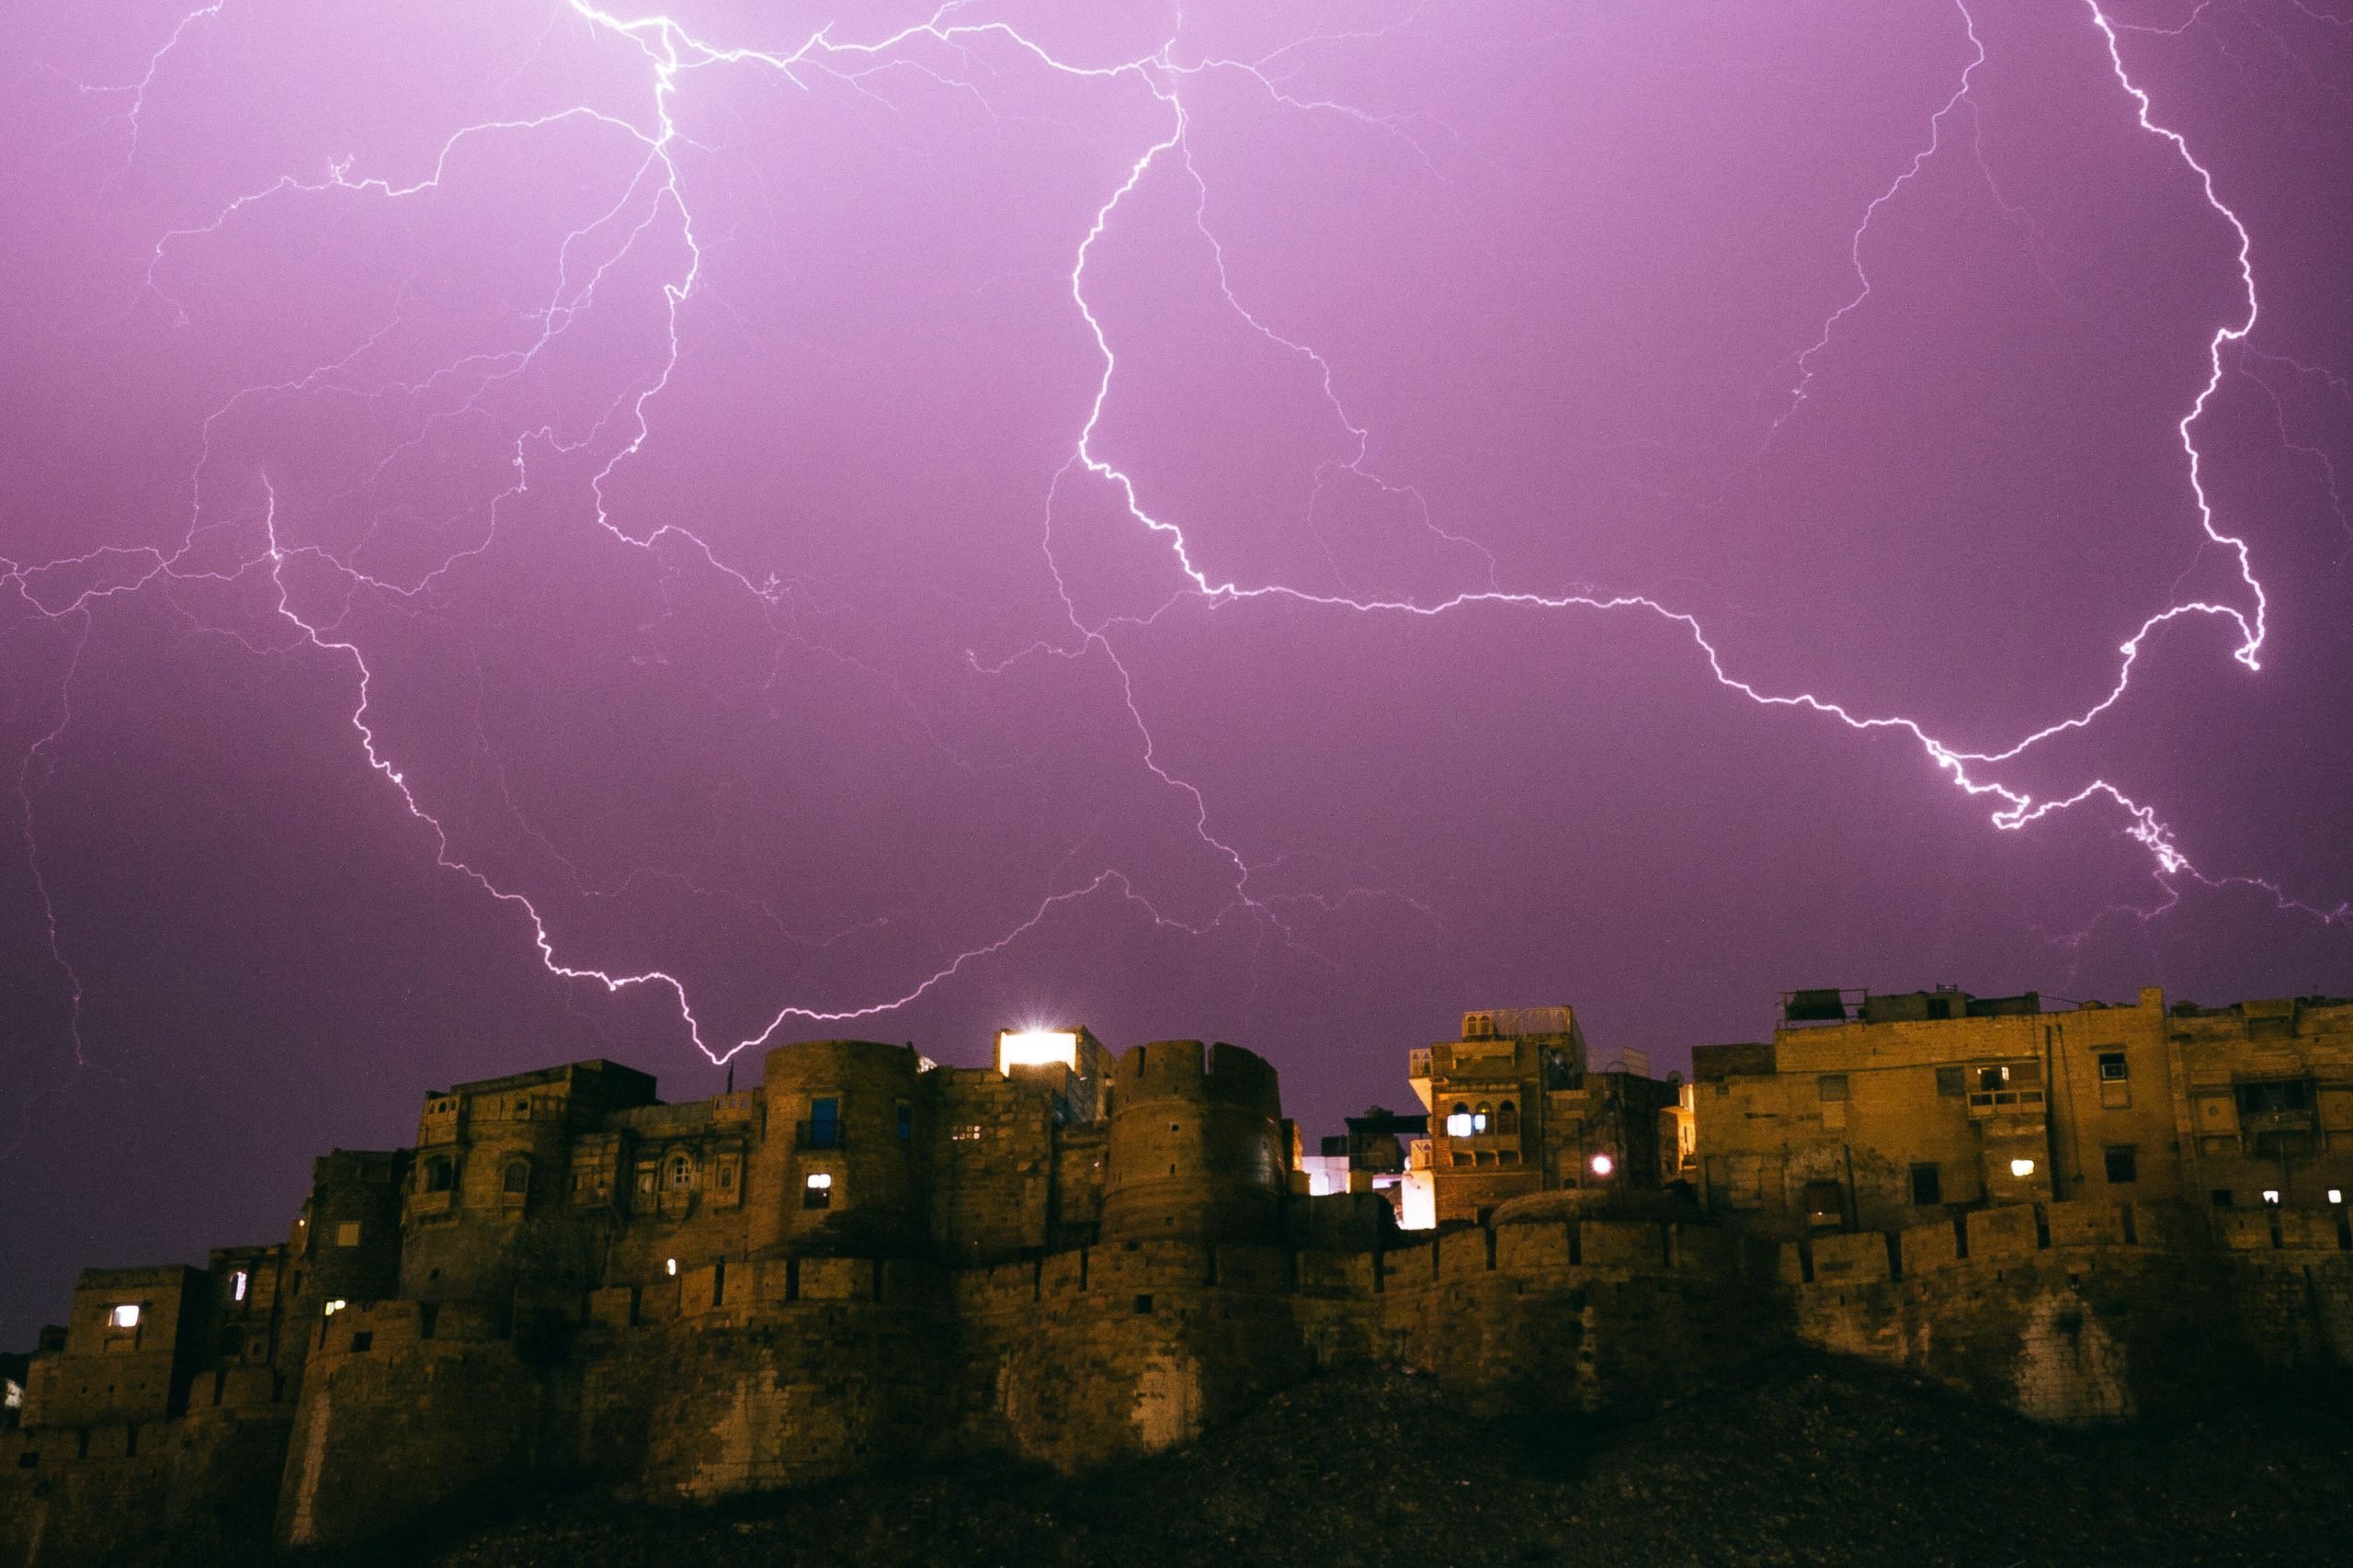 Lightning strikes above the city of Jaisalmer in Rajasthan, India